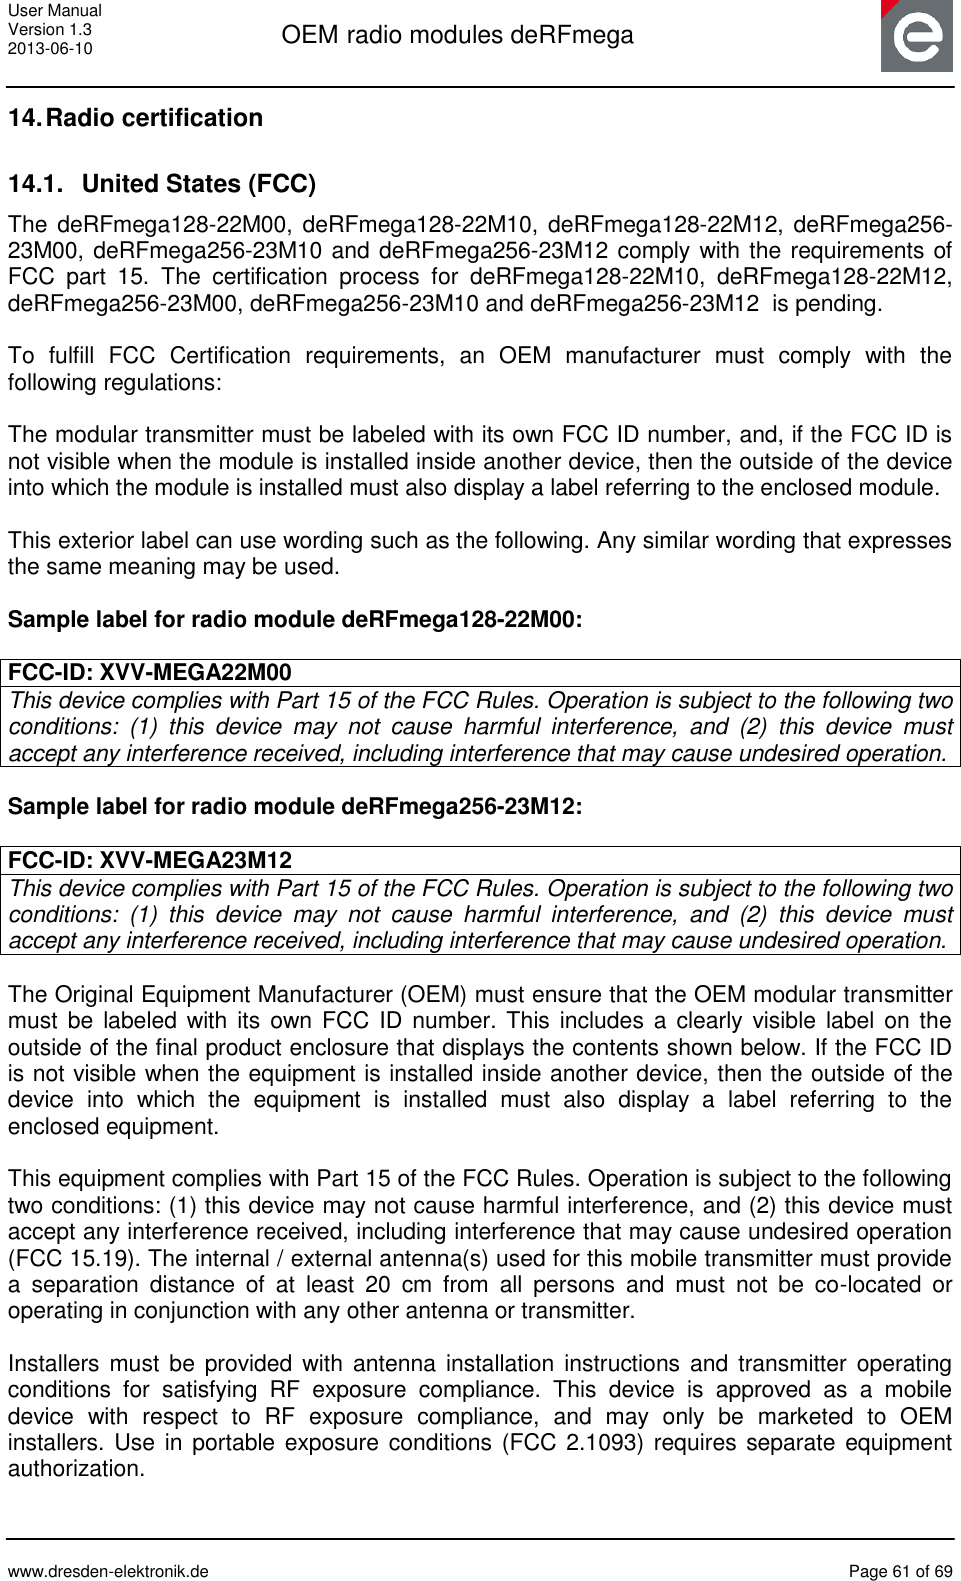 User Manual Version 1.3 2013-06-10  OEM radio modules deRFmega      www.dresden-elektronik.de  Page 61 of 69  14. Radio certification 14.1.  United States (FCC) The deRFmega128-22M00, deRFmega128-22M10, deRFmega128-22M12, deRFmega256-23M00, deRFmega256-23M10 and deRFmega256-23M12 comply with the requirements of FCC  part  15.  The  certification  process  for  deRFmega128-22M10,  deRFmega128-22M12, deRFmega256-23M00, deRFmega256-23M10 and deRFmega256-23M12  is pending.  To  fulfill  FCC  Certification  requirements,  an  OEM  manufacturer  must  comply  with  the following regulations:  The modular transmitter must be labeled with its own FCC ID number, and, if the FCC ID is not visible when the module is installed inside another device, then the outside of the device into which the module is installed must also display a label referring to the enclosed module.   This exterior label can use wording such as the following. Any similar wording that expresses the same meaning may be used.  Sample label for radio module deRFmega128-22M00:  FCC-ID: XVV-MEGA22M00 This device complies with Part 15 of the FCC Rules. Operation is subject to the following two conditions:  (1)  this  device  may  not  cause  harmful  interference,  and  (2)  this  device  must accept any interference received, including interference that may cause undesired operation.  Sample label for radio module deRFmega256-23M12:  FCC-ID: XVV-MEGA23M12 This device complies with Part 15 of the FCC Rules. Operation is subject to the following two conditions:  (1)  this  device  may  not  cause  harmful  interference,  and  (2)  this  device  must accept any interference received, including interference that may cause undesired operation.  The Original Equipment Manufacturer (OEM) must ensure that the OEM modular transmitter must  be  labeled with  its  own FCC  ID  number.  This  includes a clearly visible label on the outside of the final product enclosure that displays the contents shown below. If the FCC ID is not visible when the equipment is installed inside another device, then the outside of the device  into  which  the  equipment  is  installed  must  also  display  a  label  referring  to  the enclosed equipment.  This equipment complies with Part 15 of the FCC Rules. Operation is subject to the following two conditions: (1) this device may not cause harmful interference, and (2) this device must accept any interference received, including interference that may cause undesired operation (FCC 15.19). The internal / external antenna(s) used for this mobile transmitter must provide a  separation  distance  of  at  least  20  cm  from  all  persons  and  must  not  be  co-located  or operating in conjunction with any other antenna or transmitter.  Installers must  be  provided with antenna  installation instructions and  transmitter  operating conditions  for  satisfying  RF  exposure  compliance.  This  device  is  approved  as  a  mobile device  with  respect  to  RF  exposure  compliance,  and  may  only  be  marketed  to  OEM installers. Use in portable exposure conditions (FCC 2.1093)  requires separate equipment authorization.  